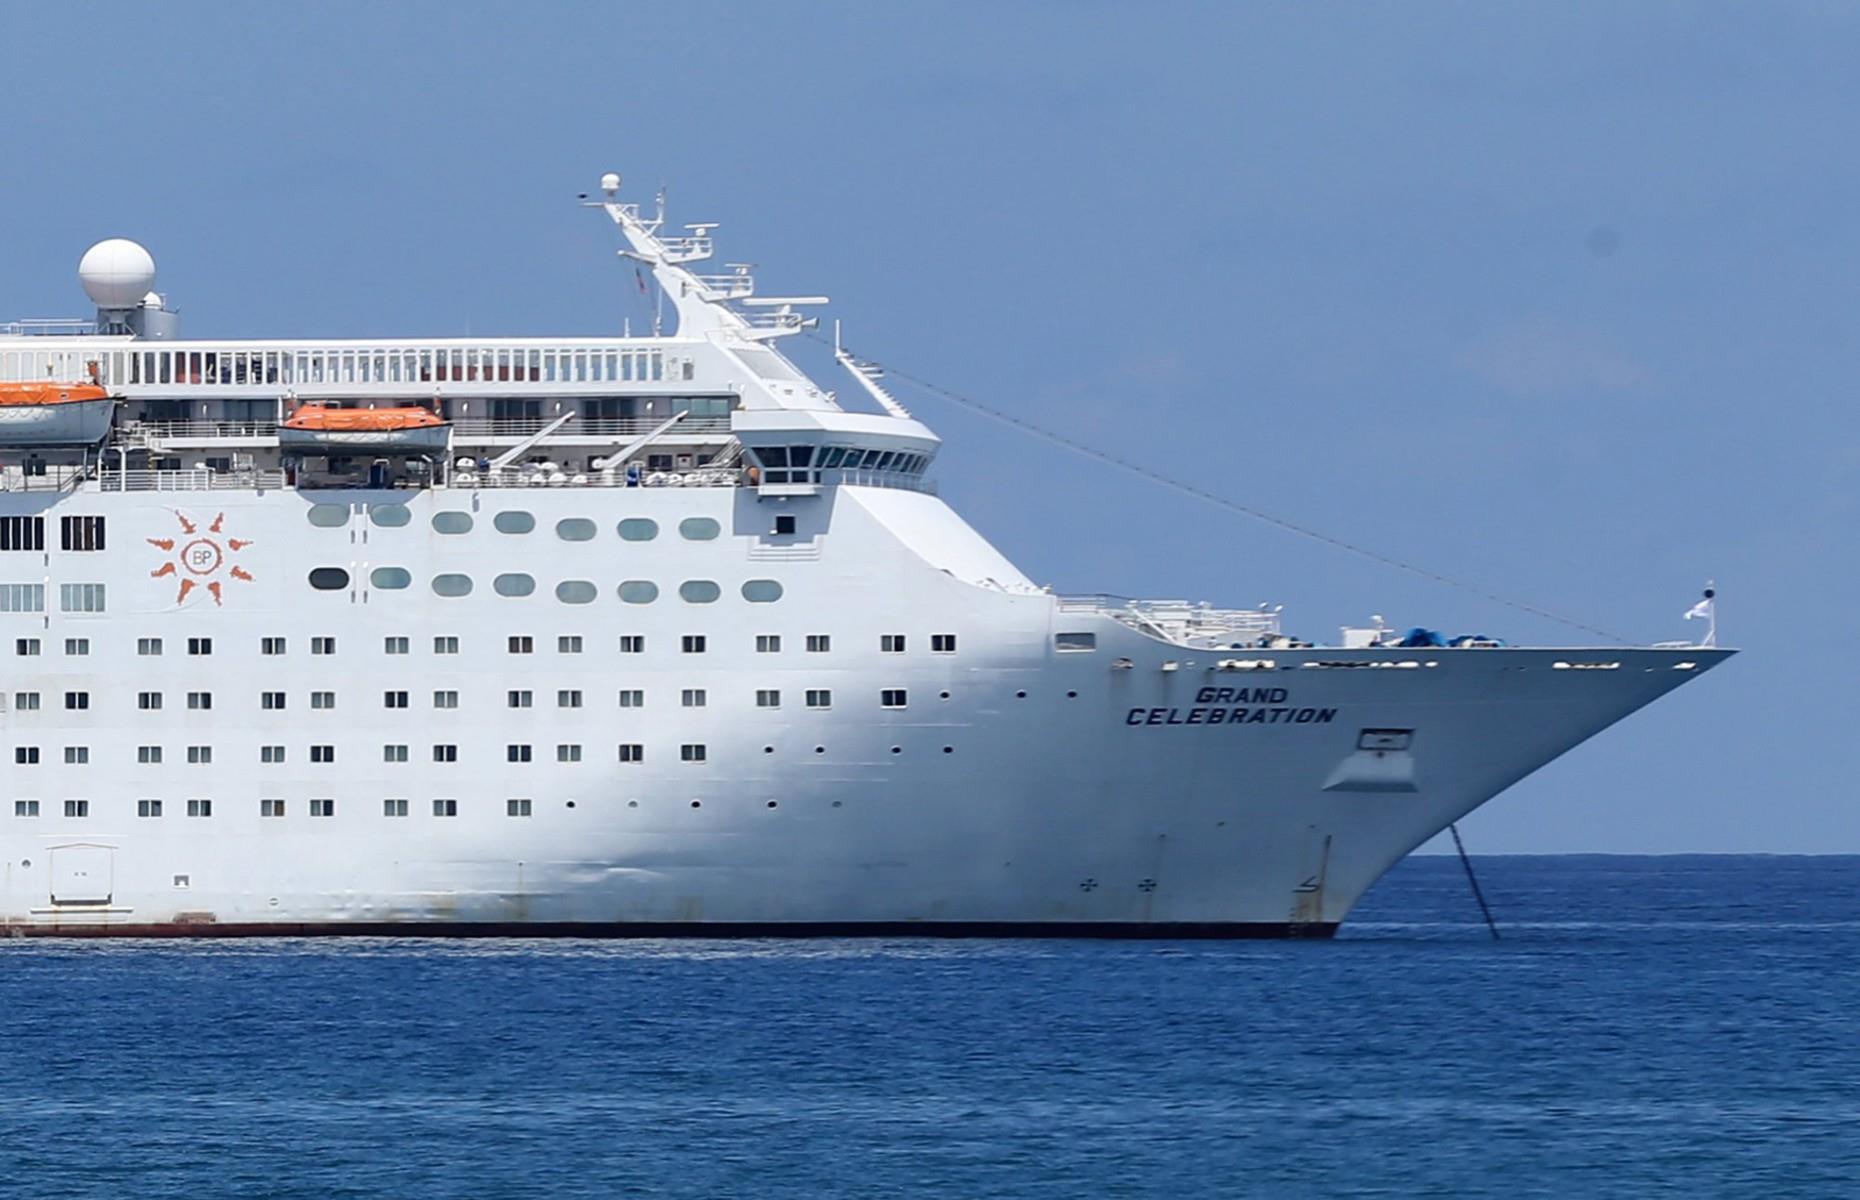 <p>The 1,500-passenger Grand Celebration was more than a cruise ship, she also helped the people of Grand Bahama Island during the devastating events caused by Hurricane Dorian in 2019. However, the ship was sold for scrap during the COVID-19 pandemic and headed for the Alang junkyard in India at the end of 2020.  </p>  <p><strong><a href="https://www.lovemoney.com/galleries/104789/stories-of-hope-places-that-bounced-back-from-the-worlds-worst-weather?page=1">Stories of hope: amazing places that bounced back from the world's worst weather</a></strong></p>